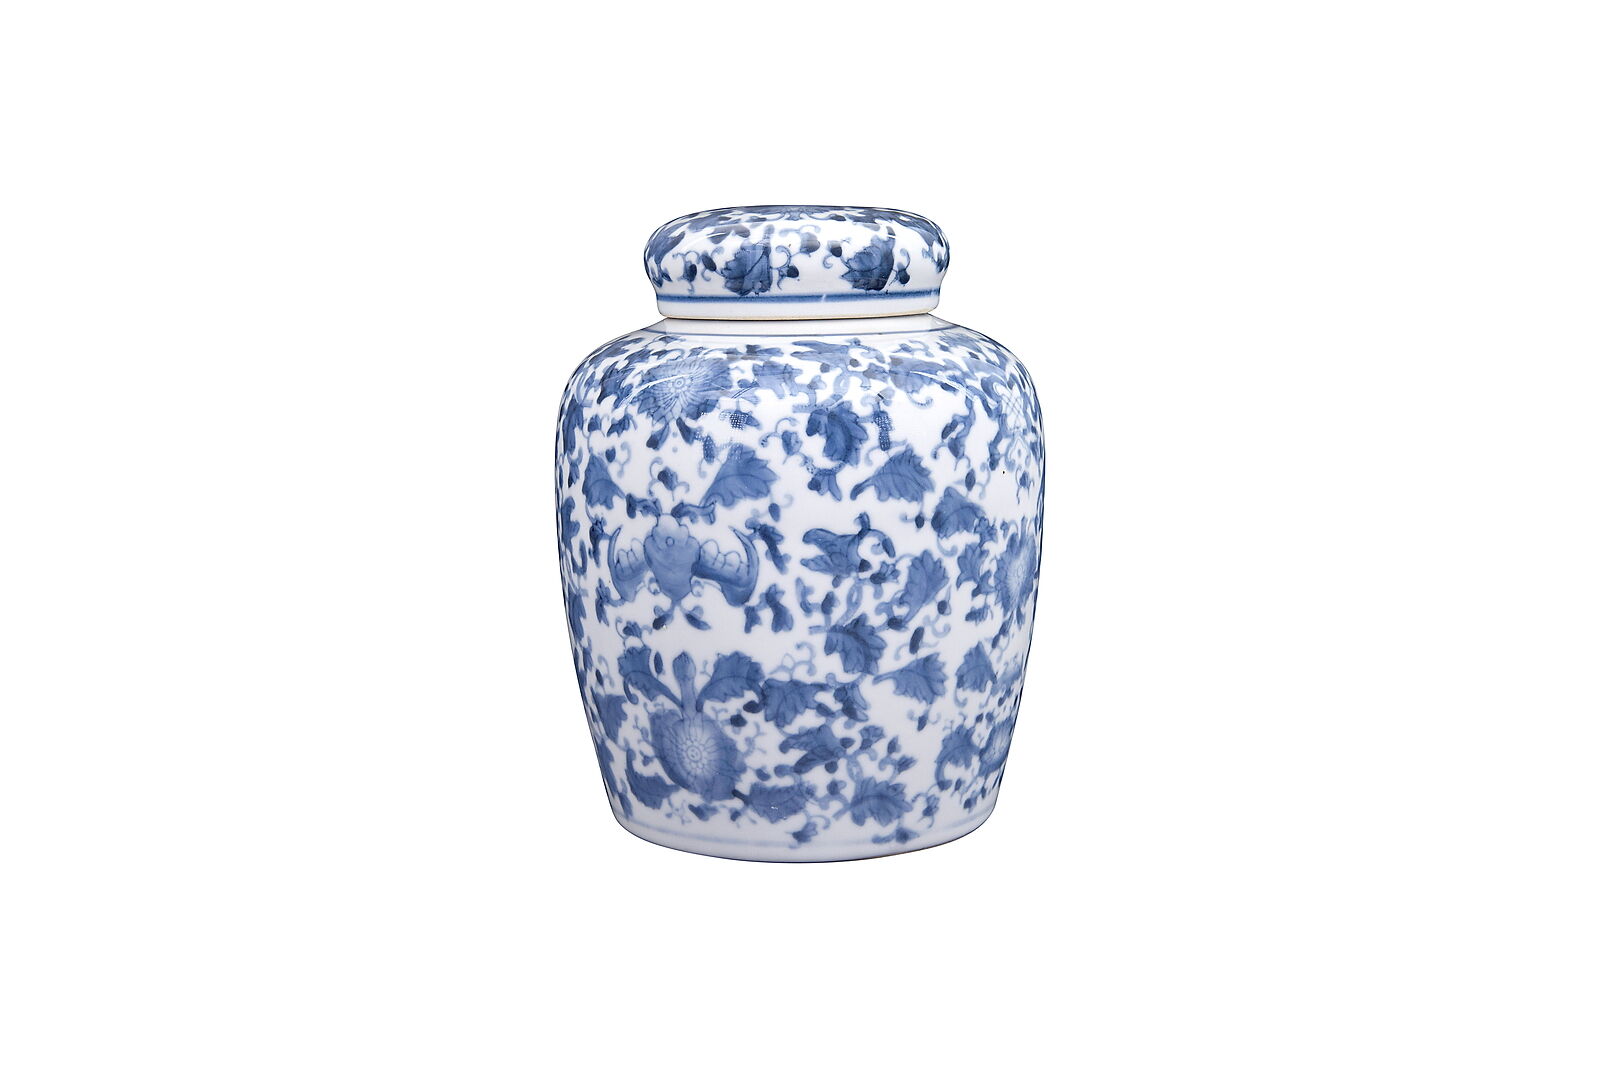 Blue and White Ginger Jar with Lid